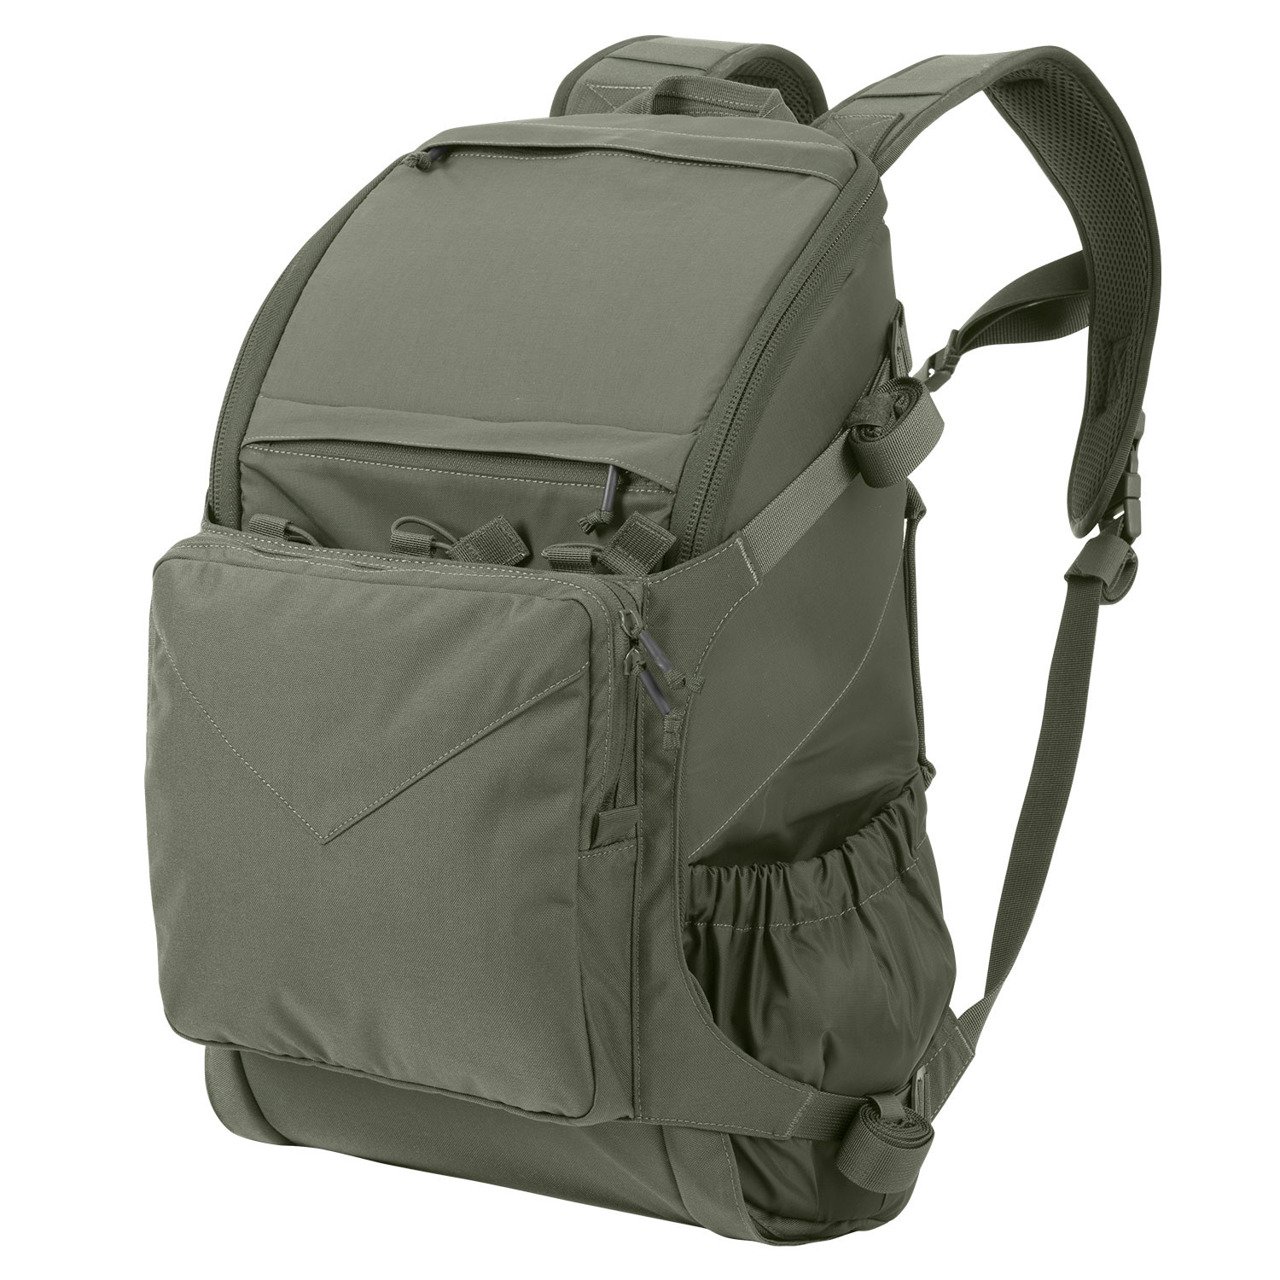 Helikon - Range Bag - Cordura® - MultiCam® - TB-RGB-CD-34 best price, check availability, buy online with